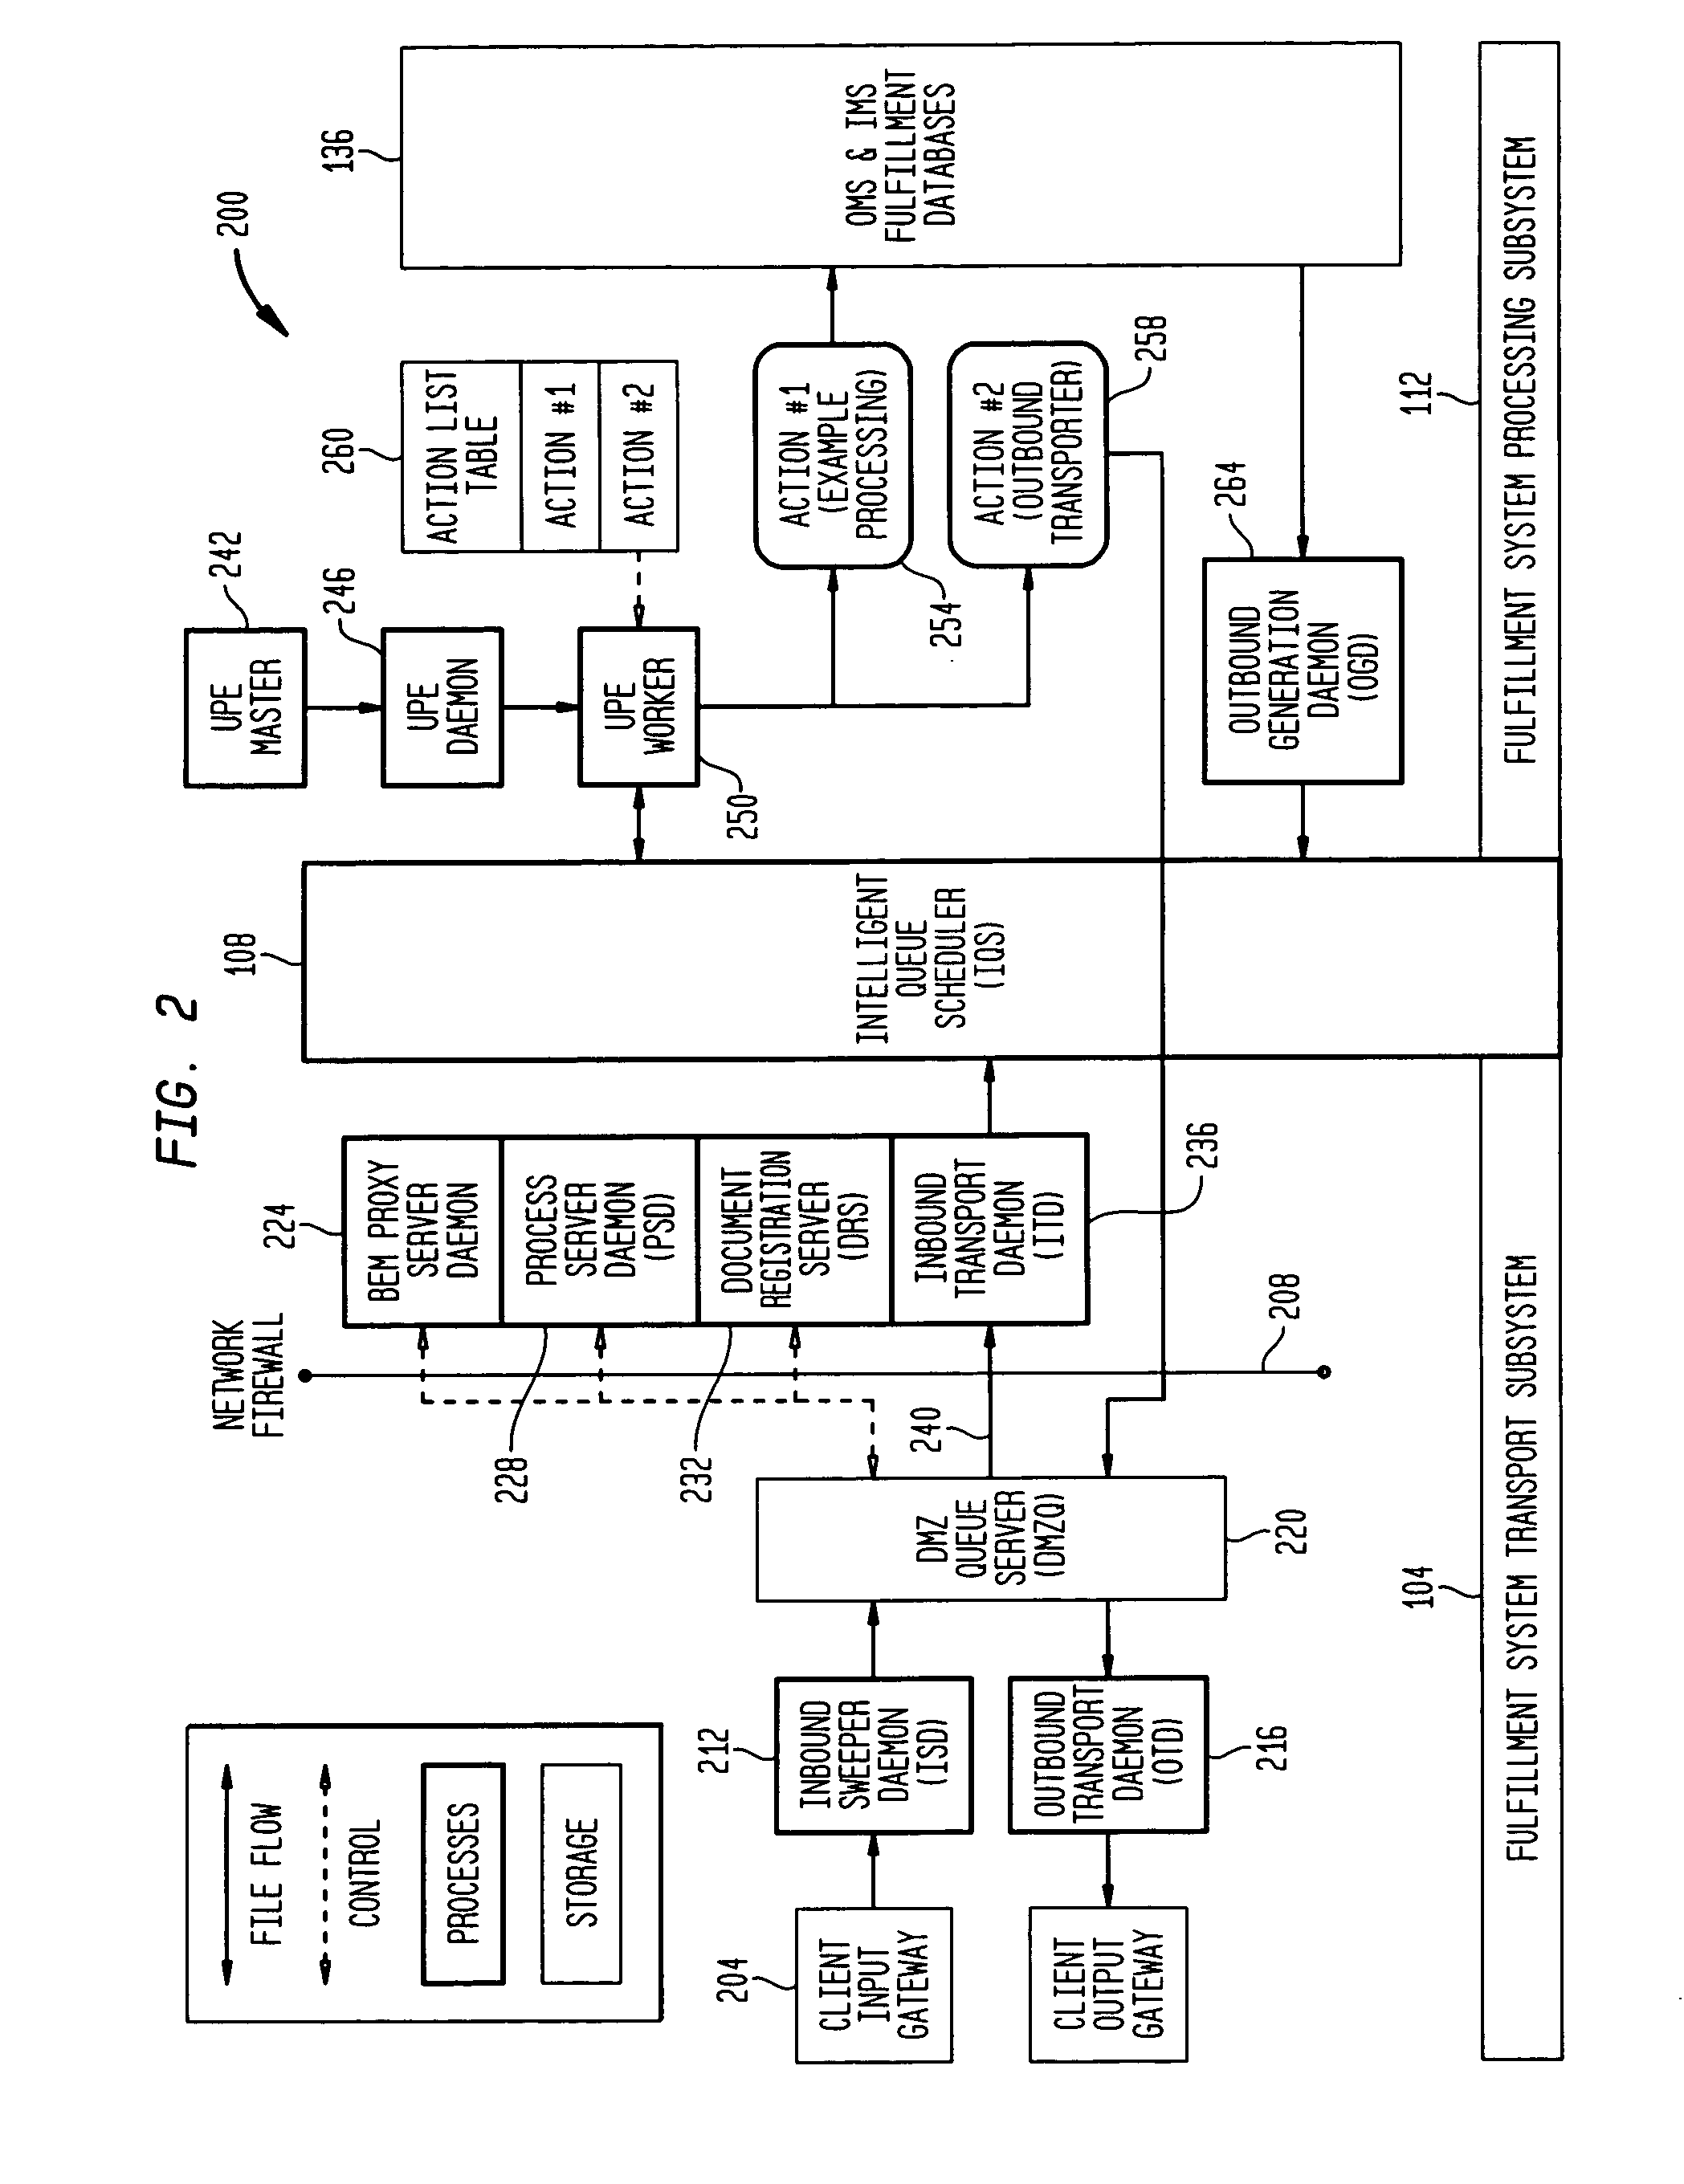 Method and apparatus for scalable transport processing fulfillment system